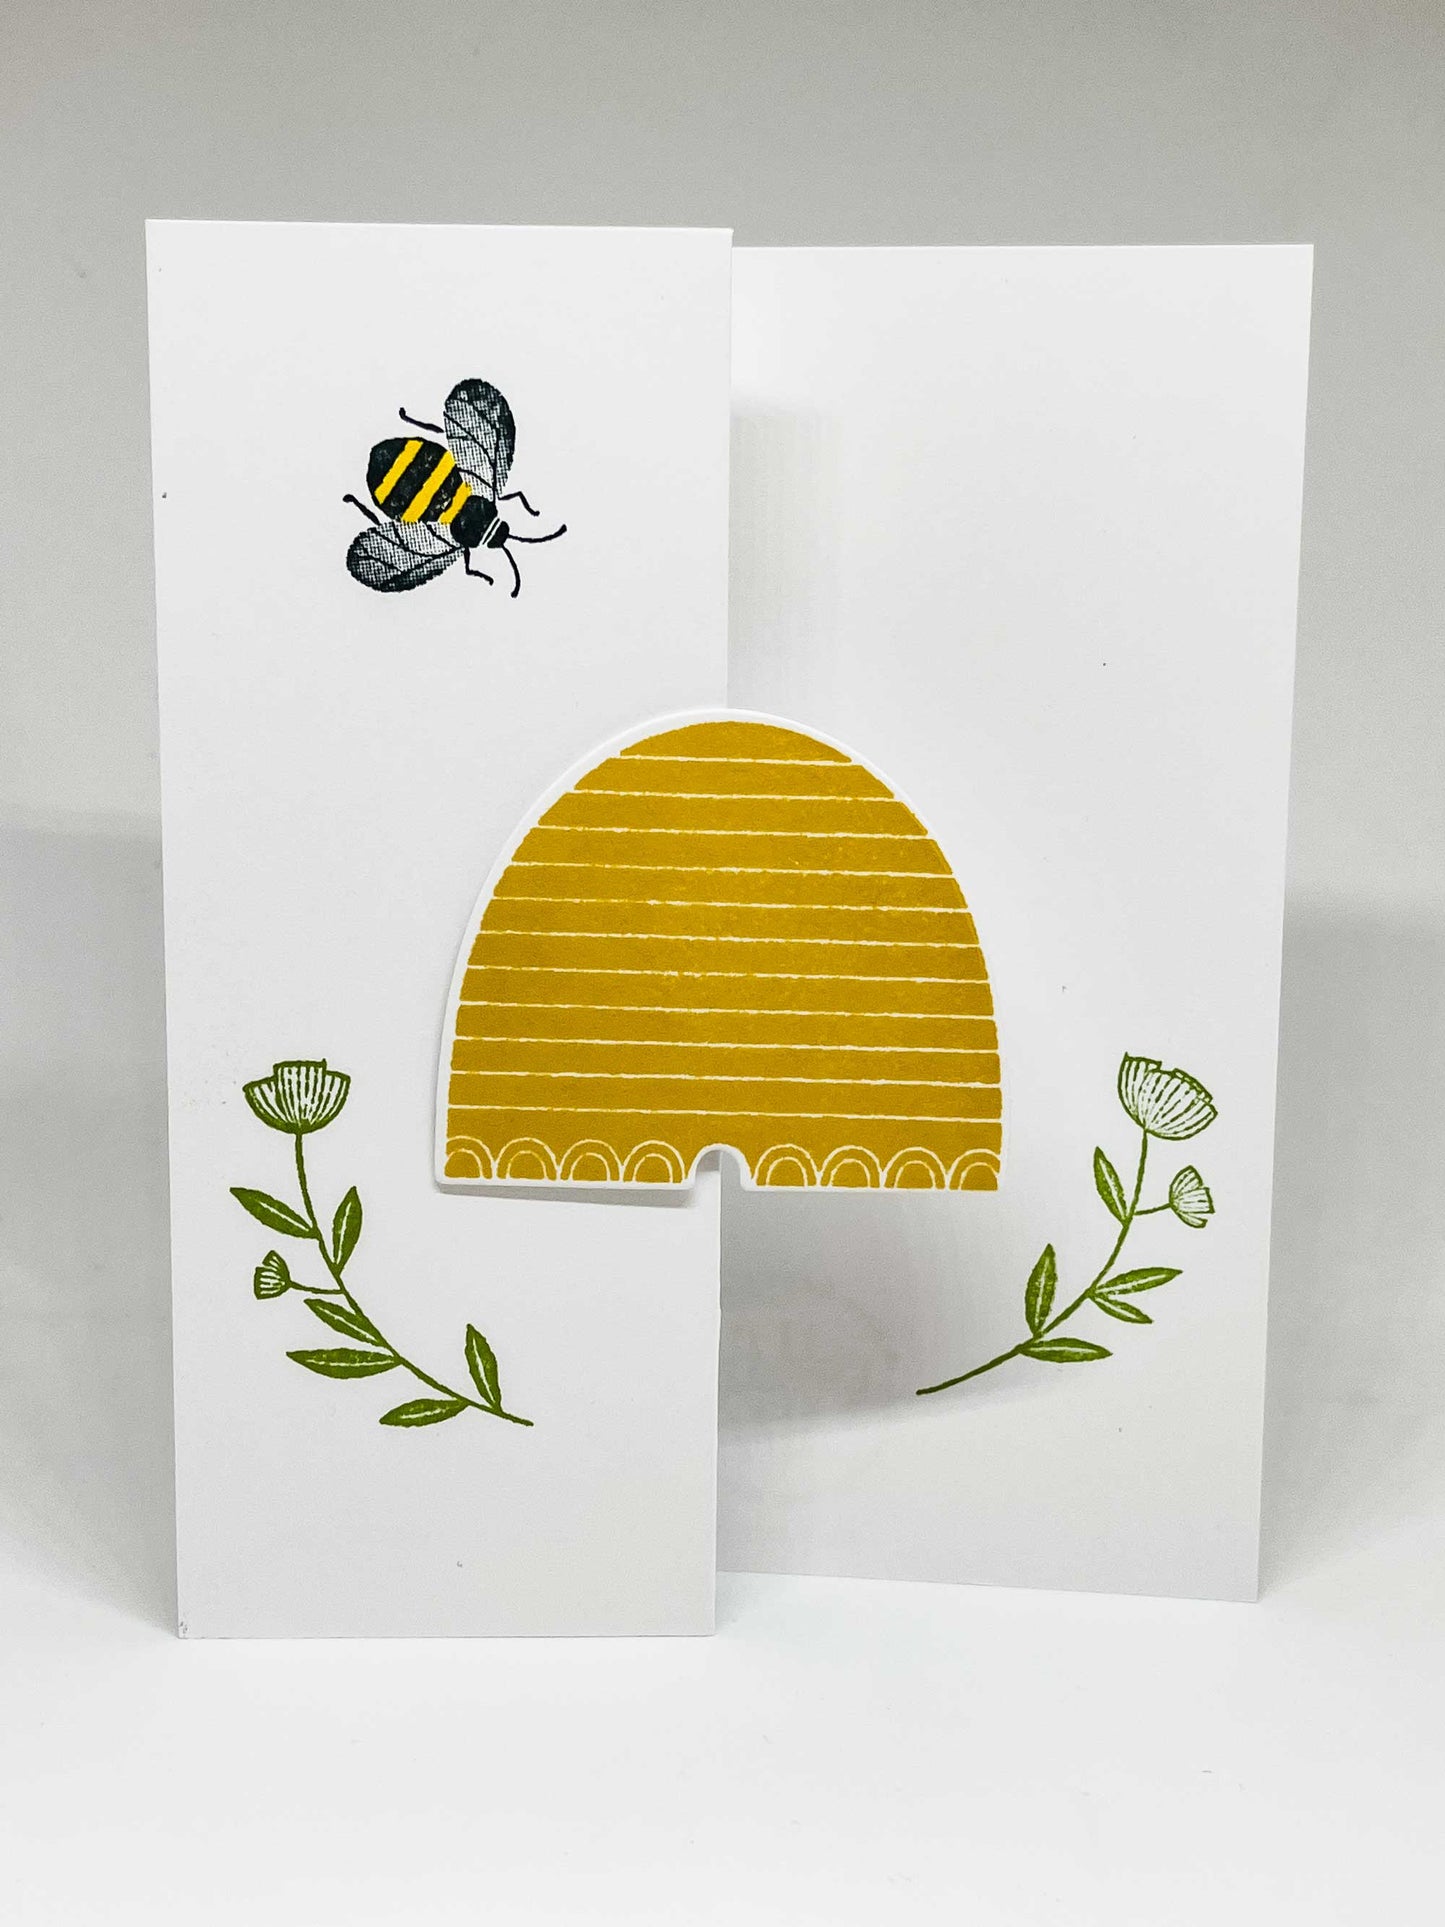 Tri-fold greeting card with hive, flowers and a honeybee